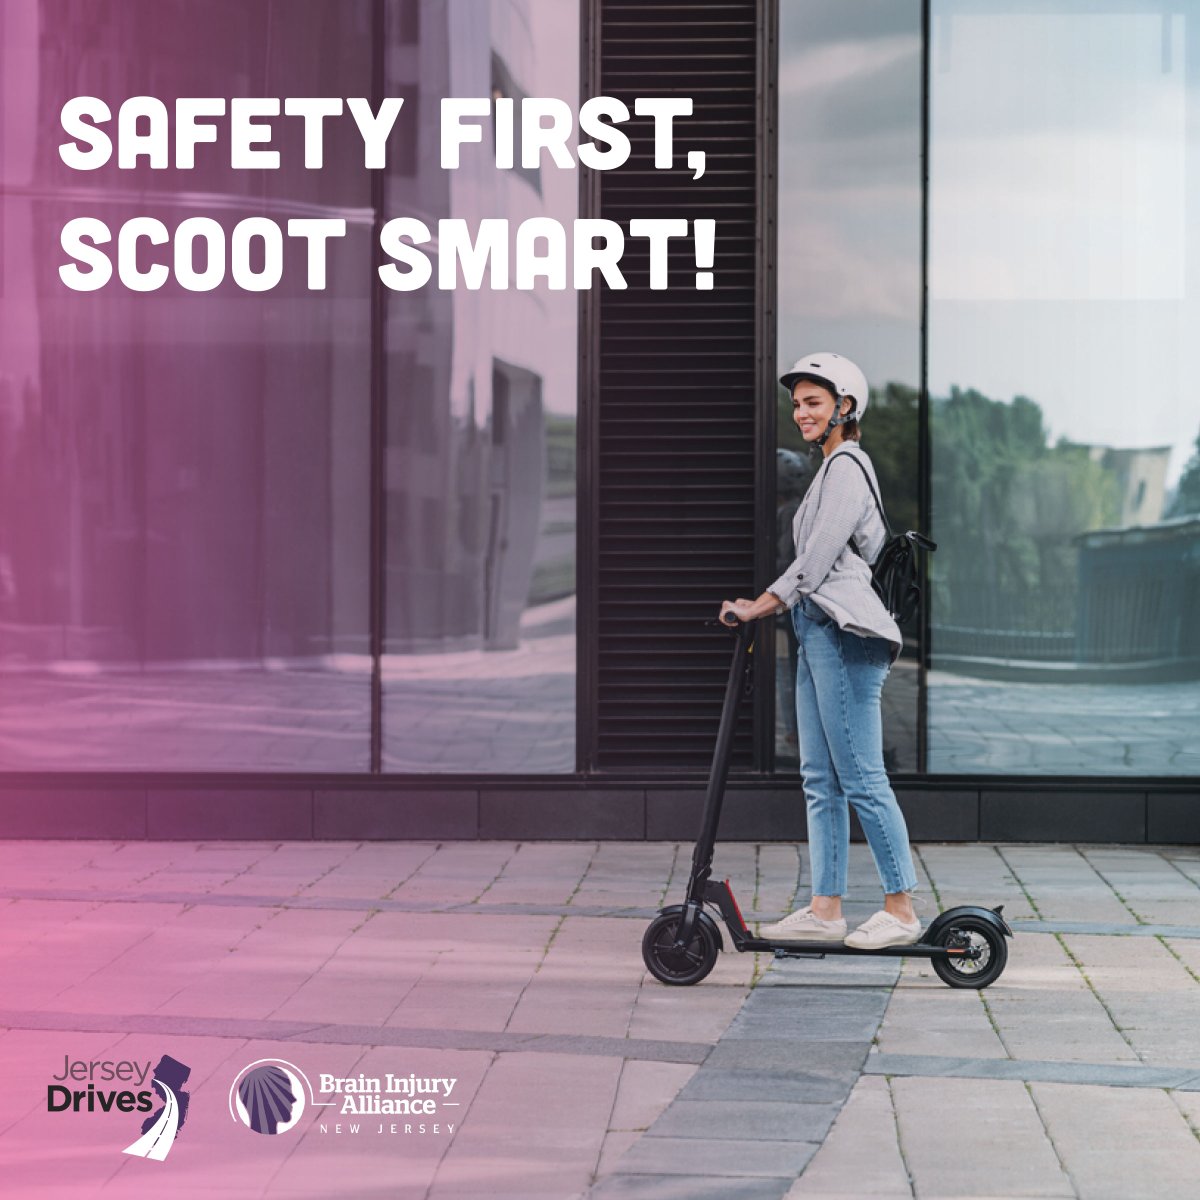 Stay charged up on safety! Keep your helmet on and ride responsibly on e-scooters. #E-ScooterSafety #JerseyDrives